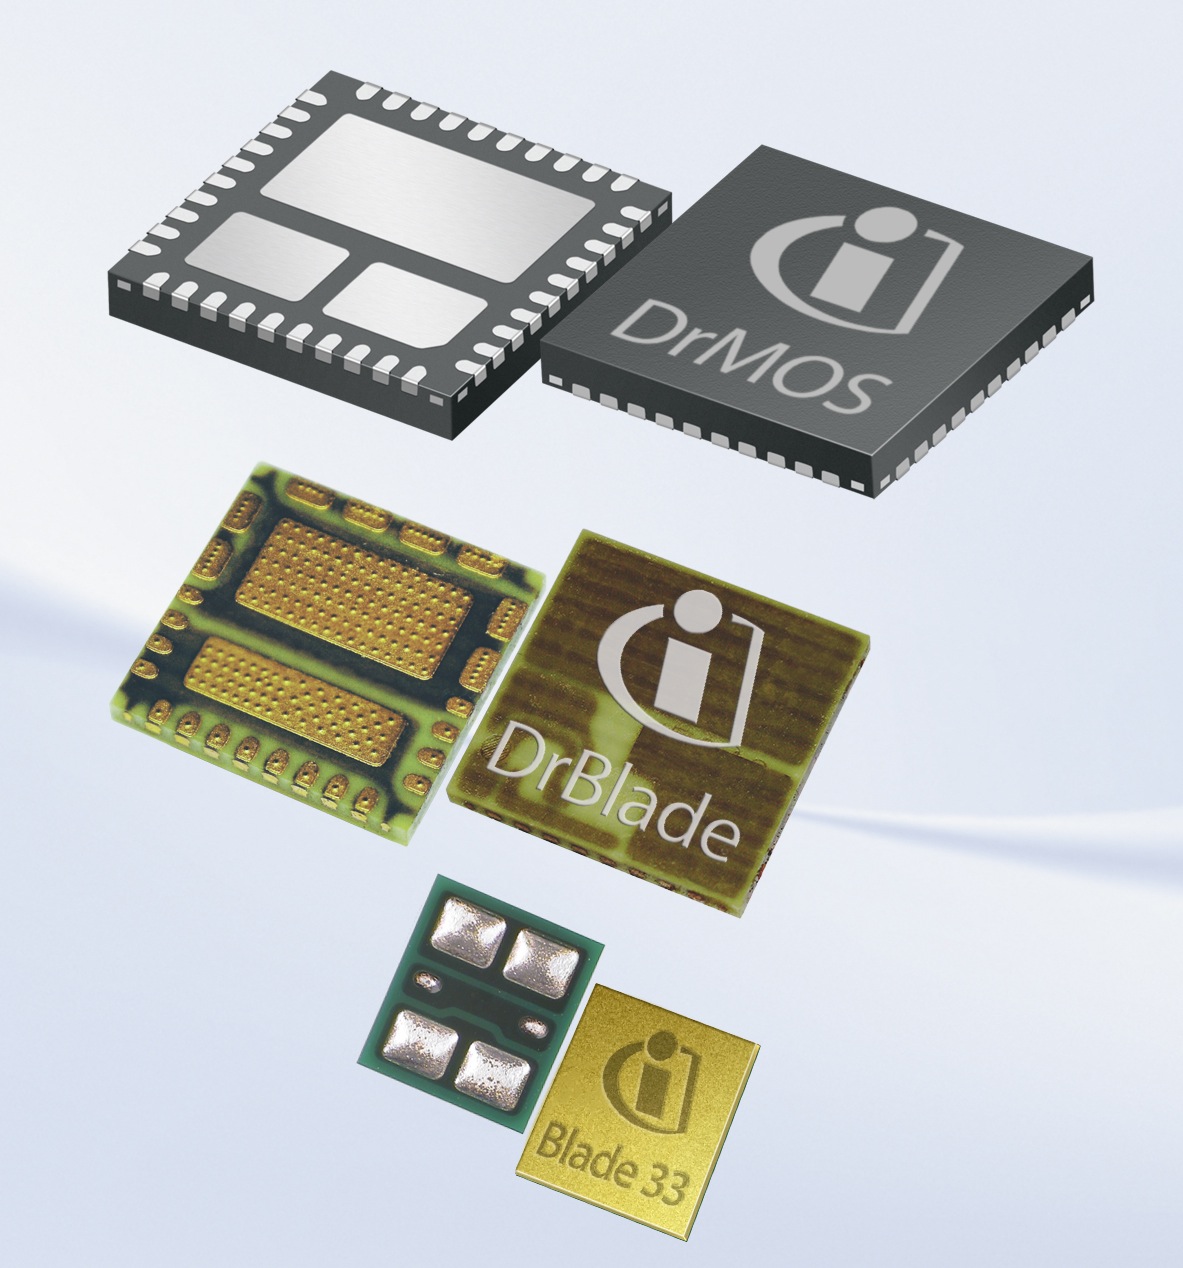 Innovative chip-embedded packaging technology introduced at APEC 2013